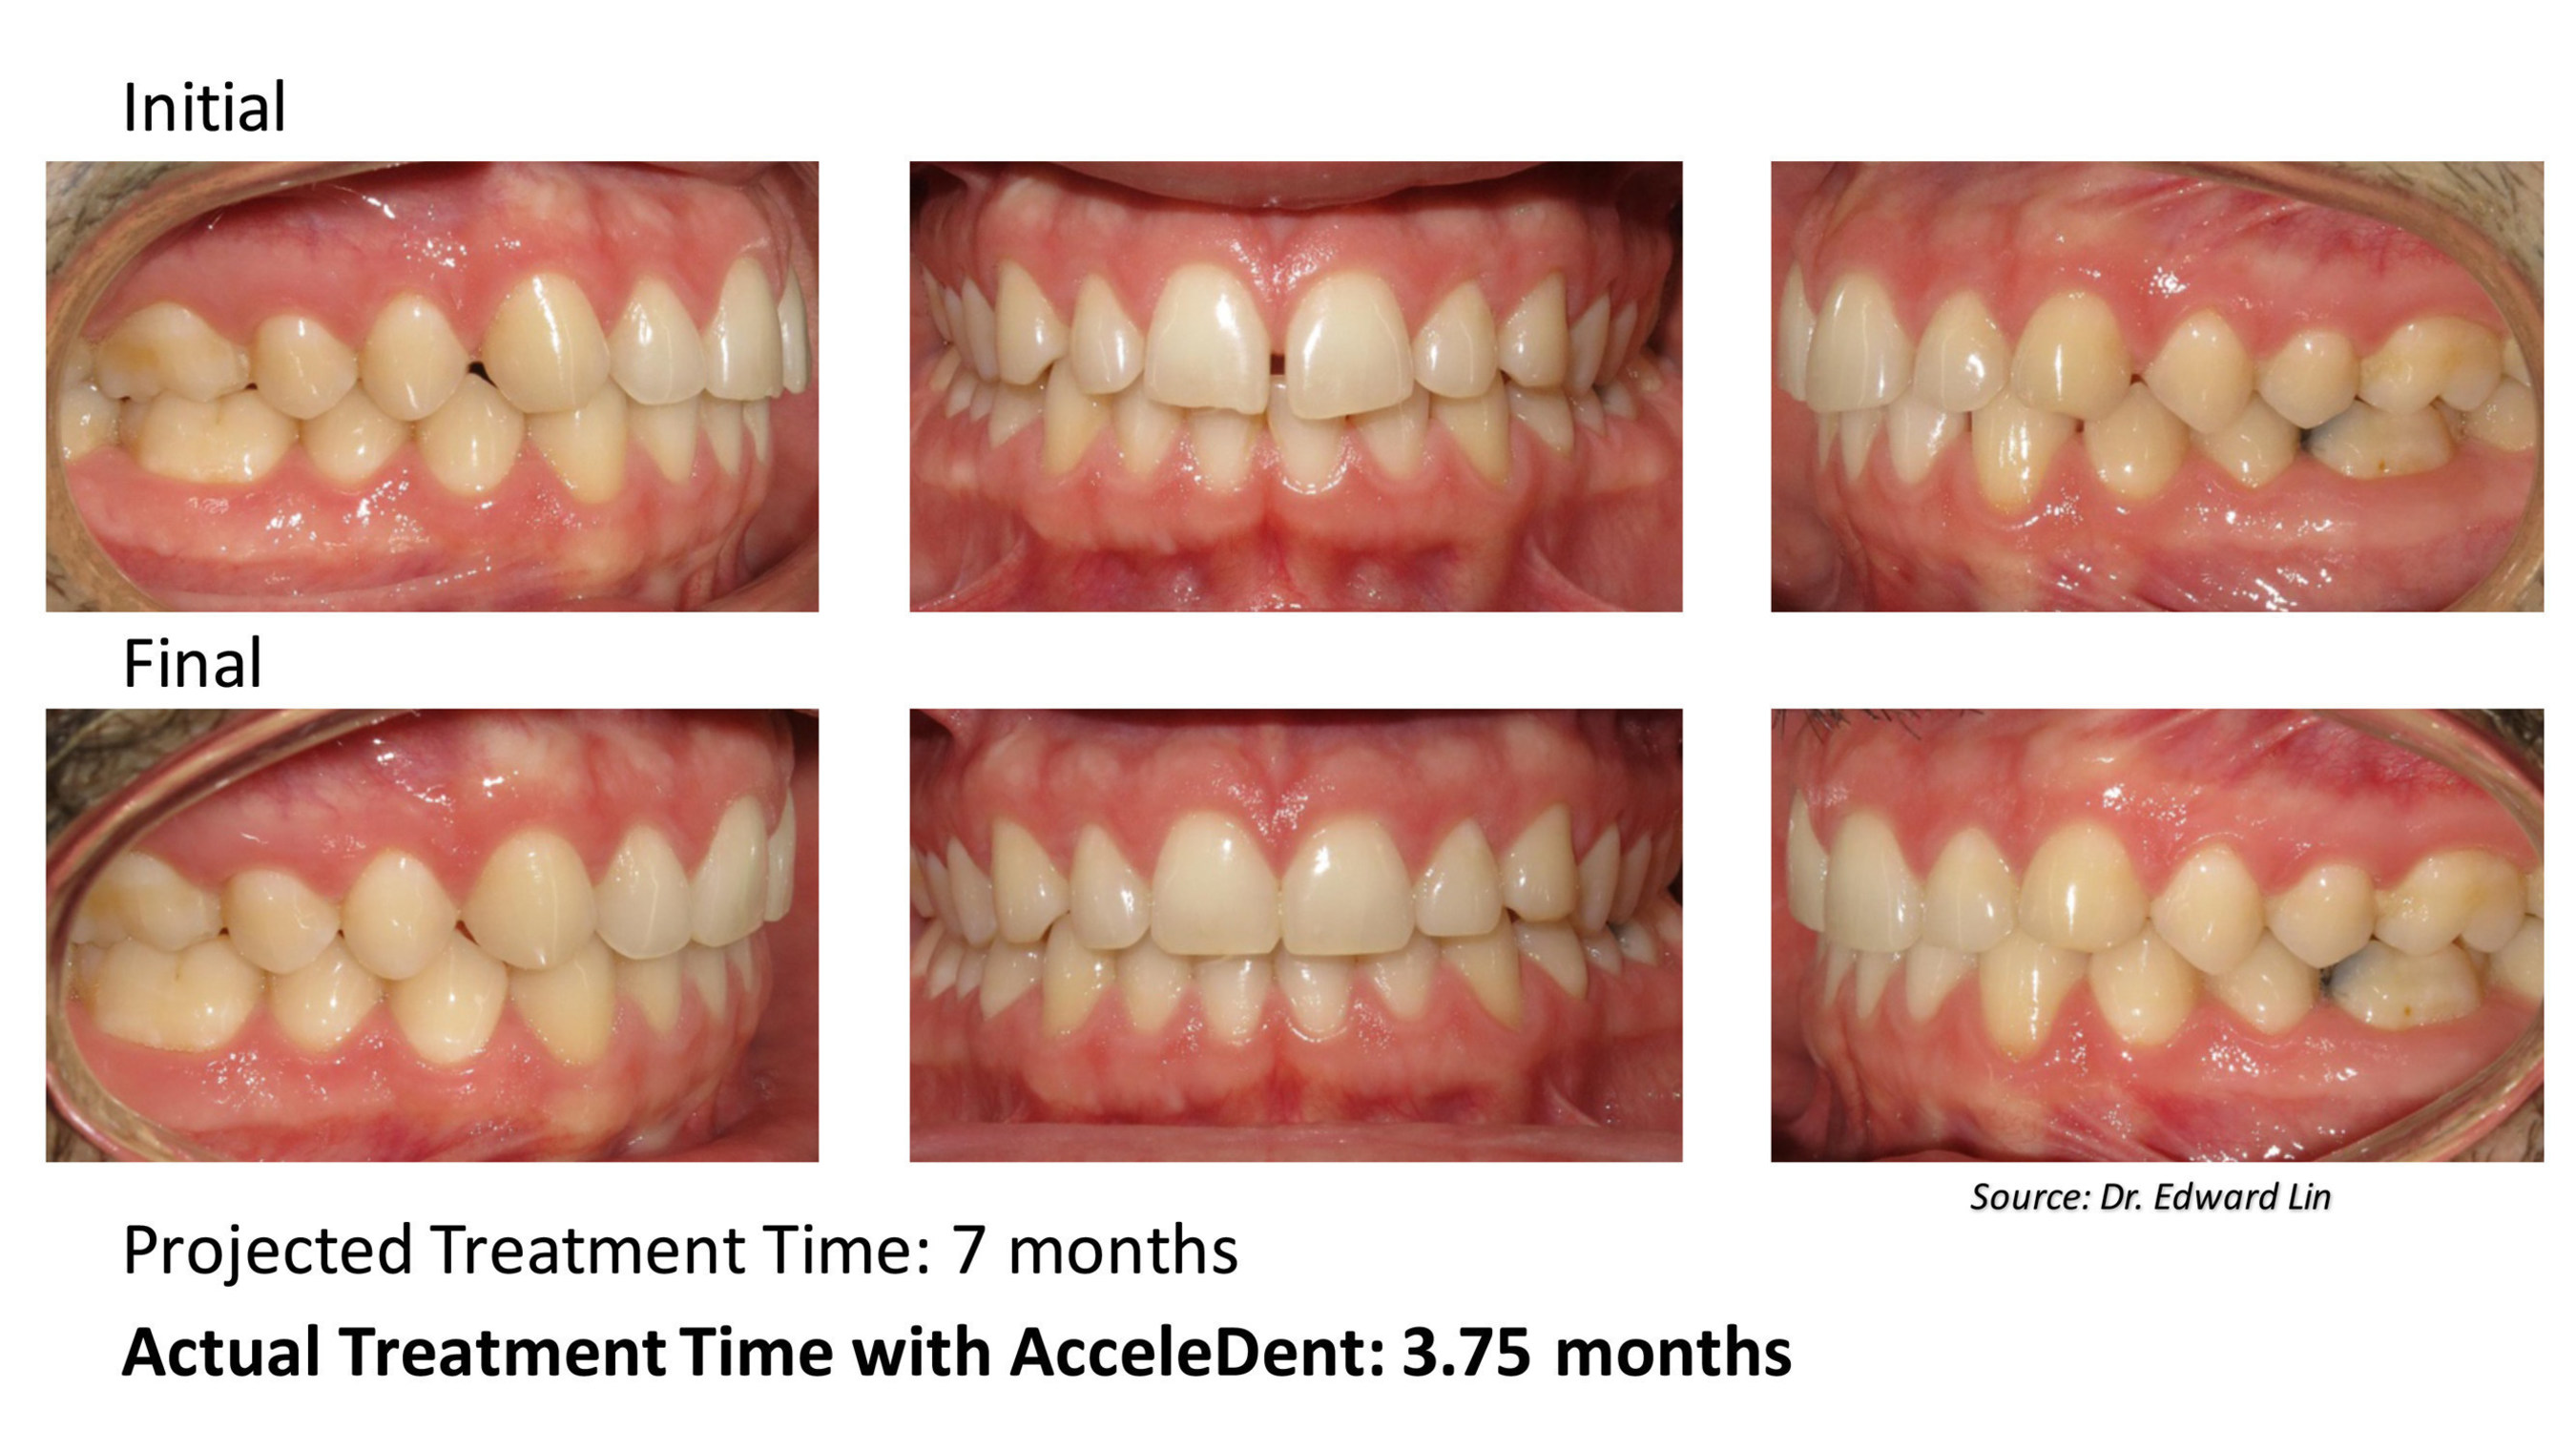 This 30-year-old male patient was treated by Dr. Edward Lin of Orthodontic Specialists in Green Bay, Wisconsin. The patient's treatment plan included aligners in conjunction with AcceleDent, the first and only FDA-cleared vibratory device that has been clinically proven to speed up braces and aligner treatment by as much as 50 percent and reduce the discomfort associated with orthodontic treatment. The patient presented as a class I with mild spacing and completed accelerated orthodontic treatment with...